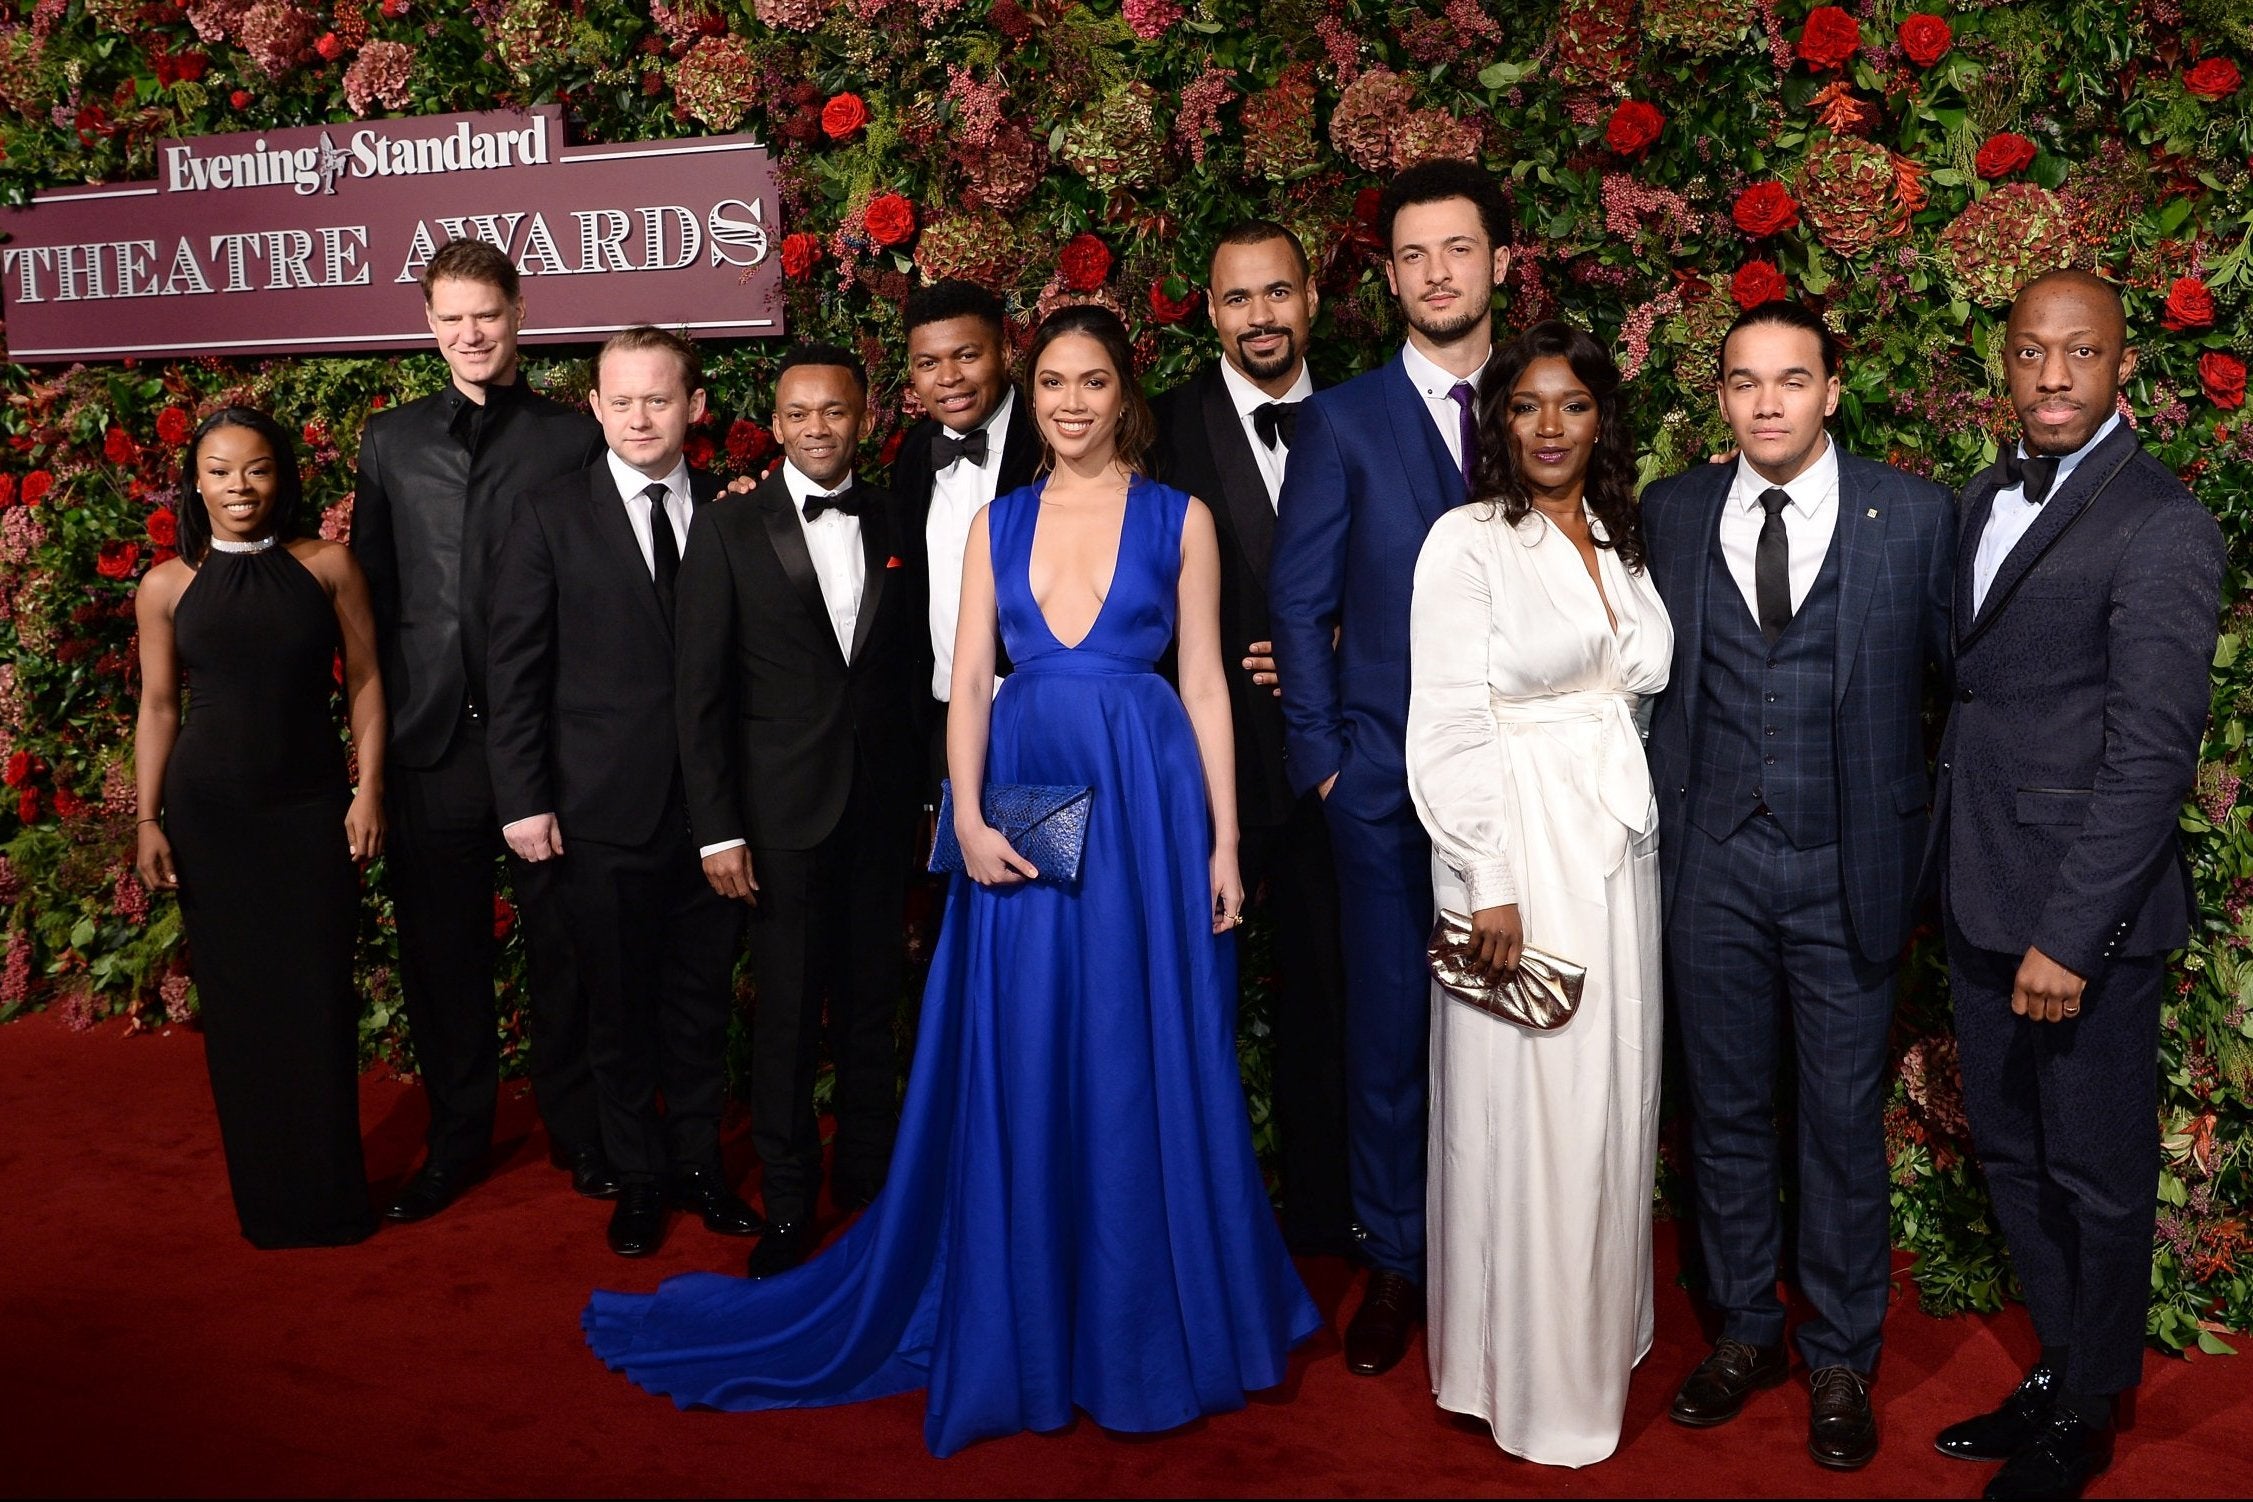 The cast of Hamilton attend the Evening Standard Theatre Awards 2018 at the Theatre Royal in London.